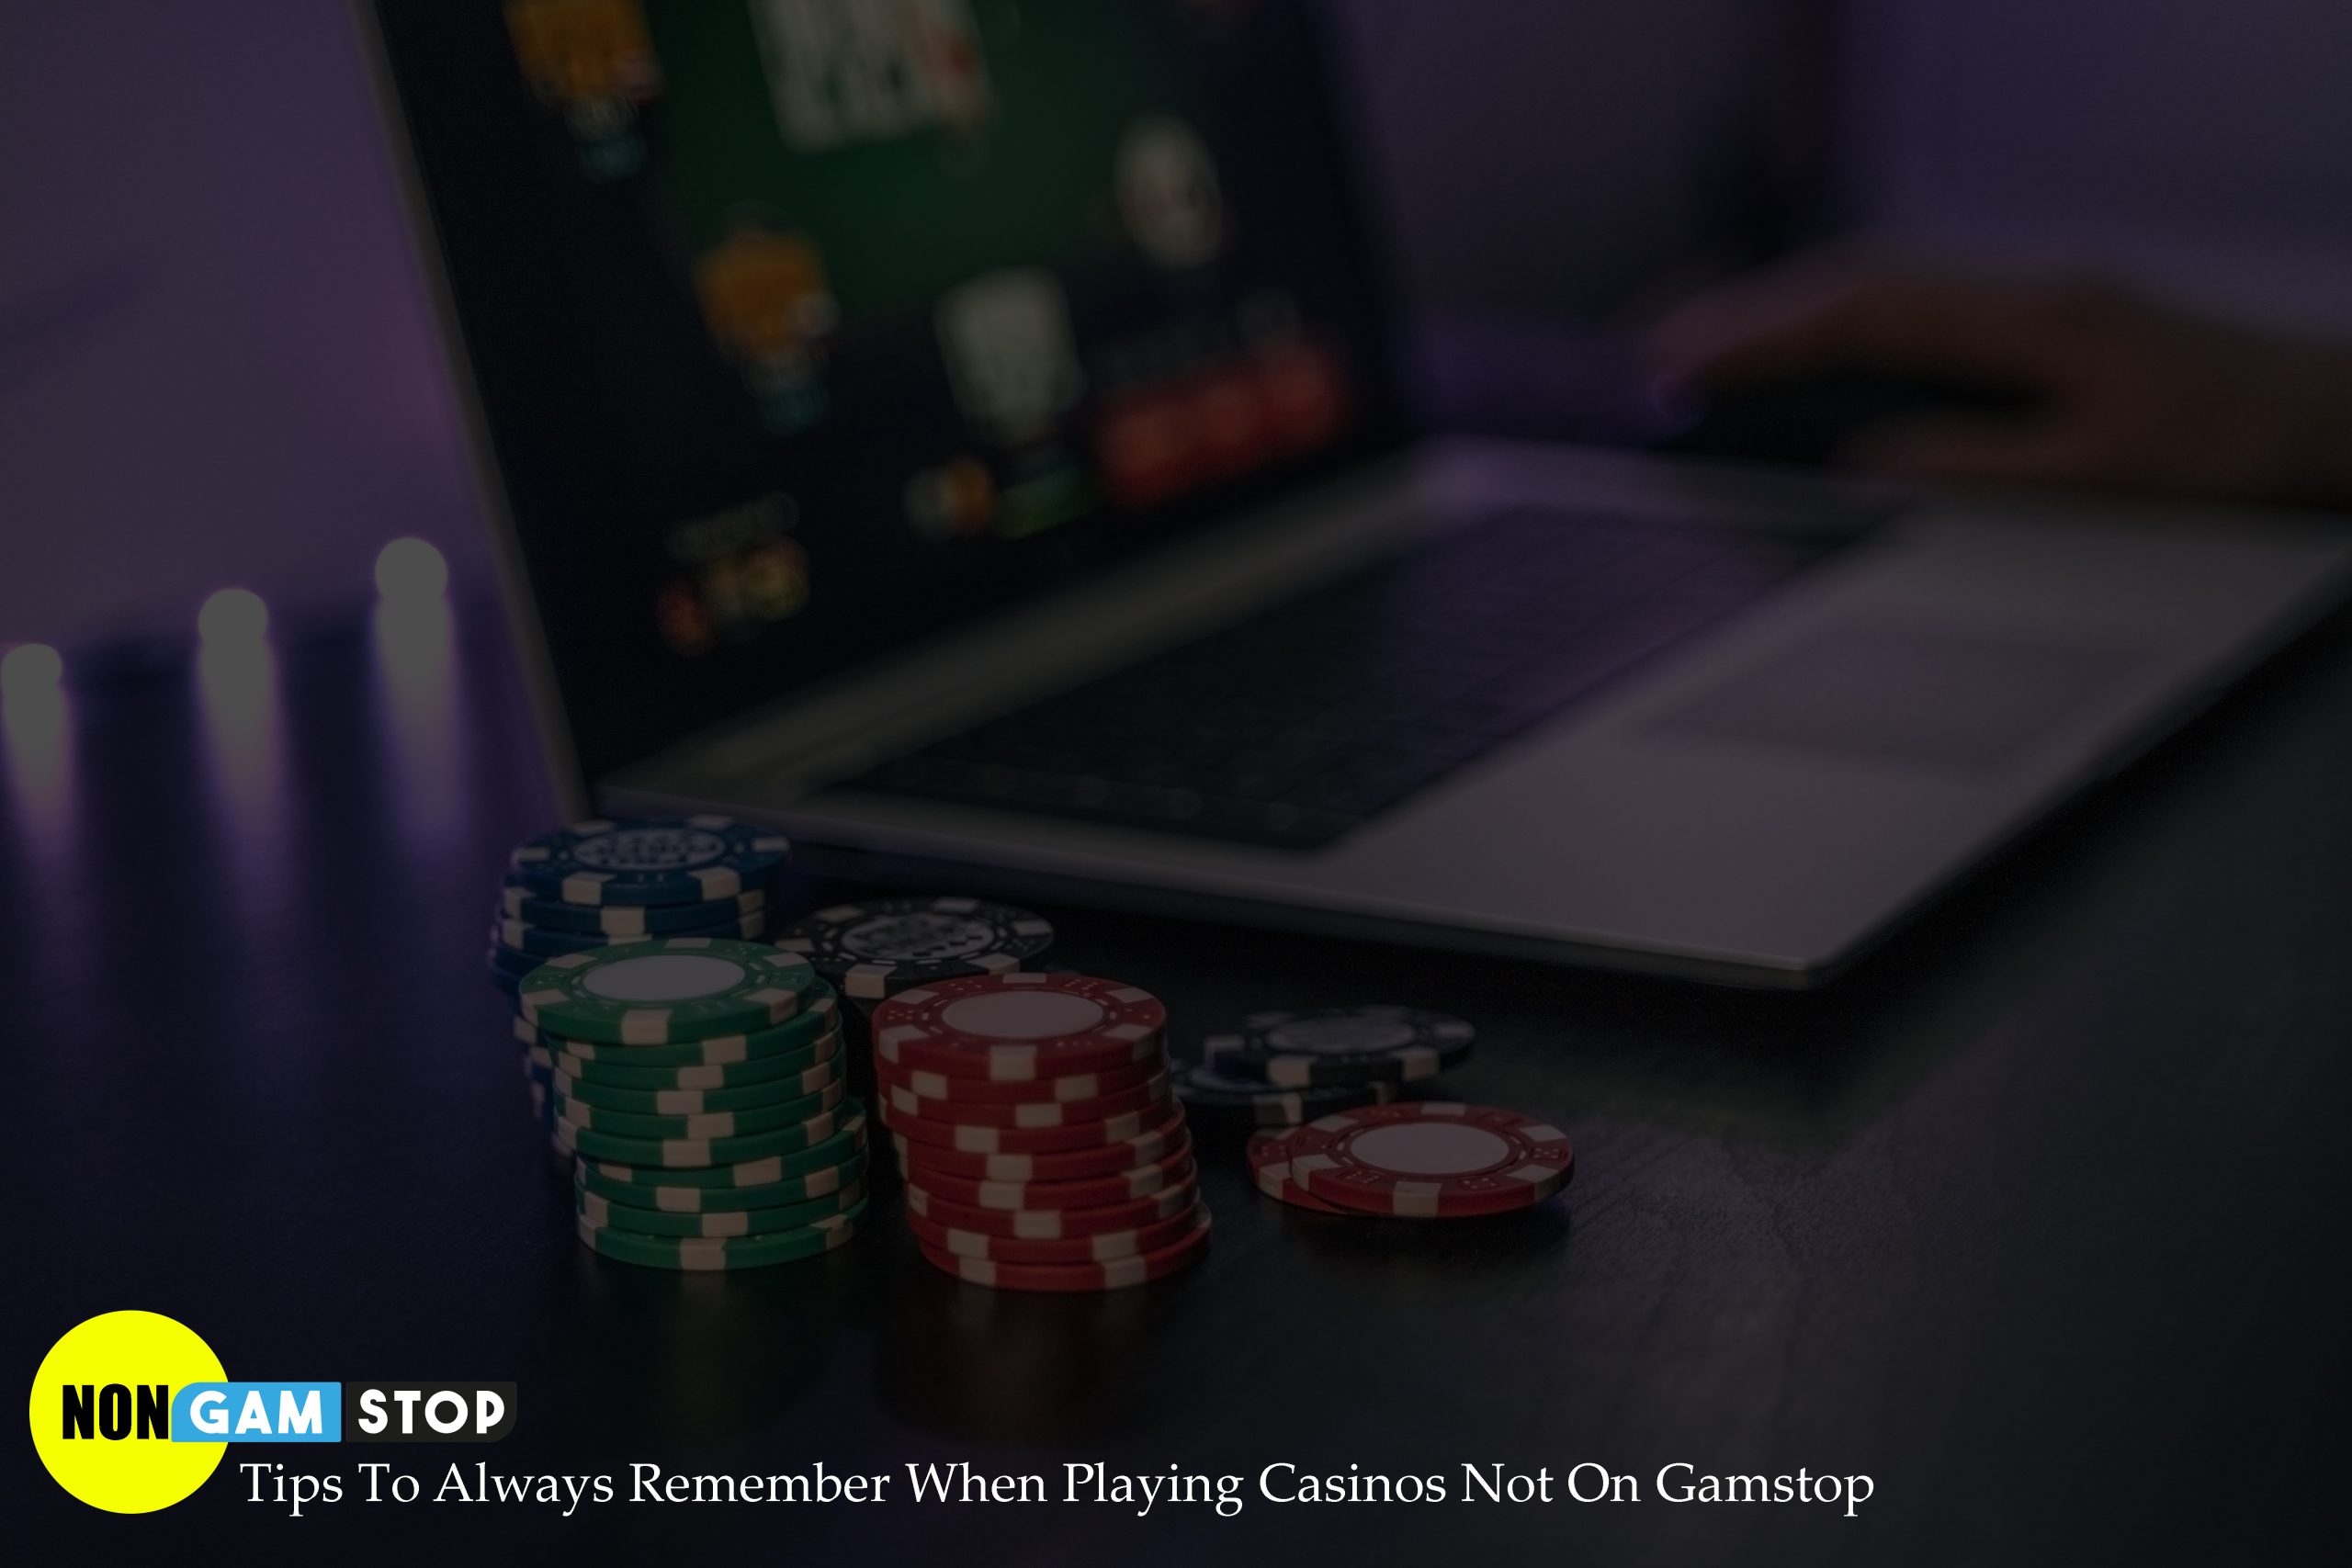 Tips To Always Remember When Playing Casinos Not On Gamstop